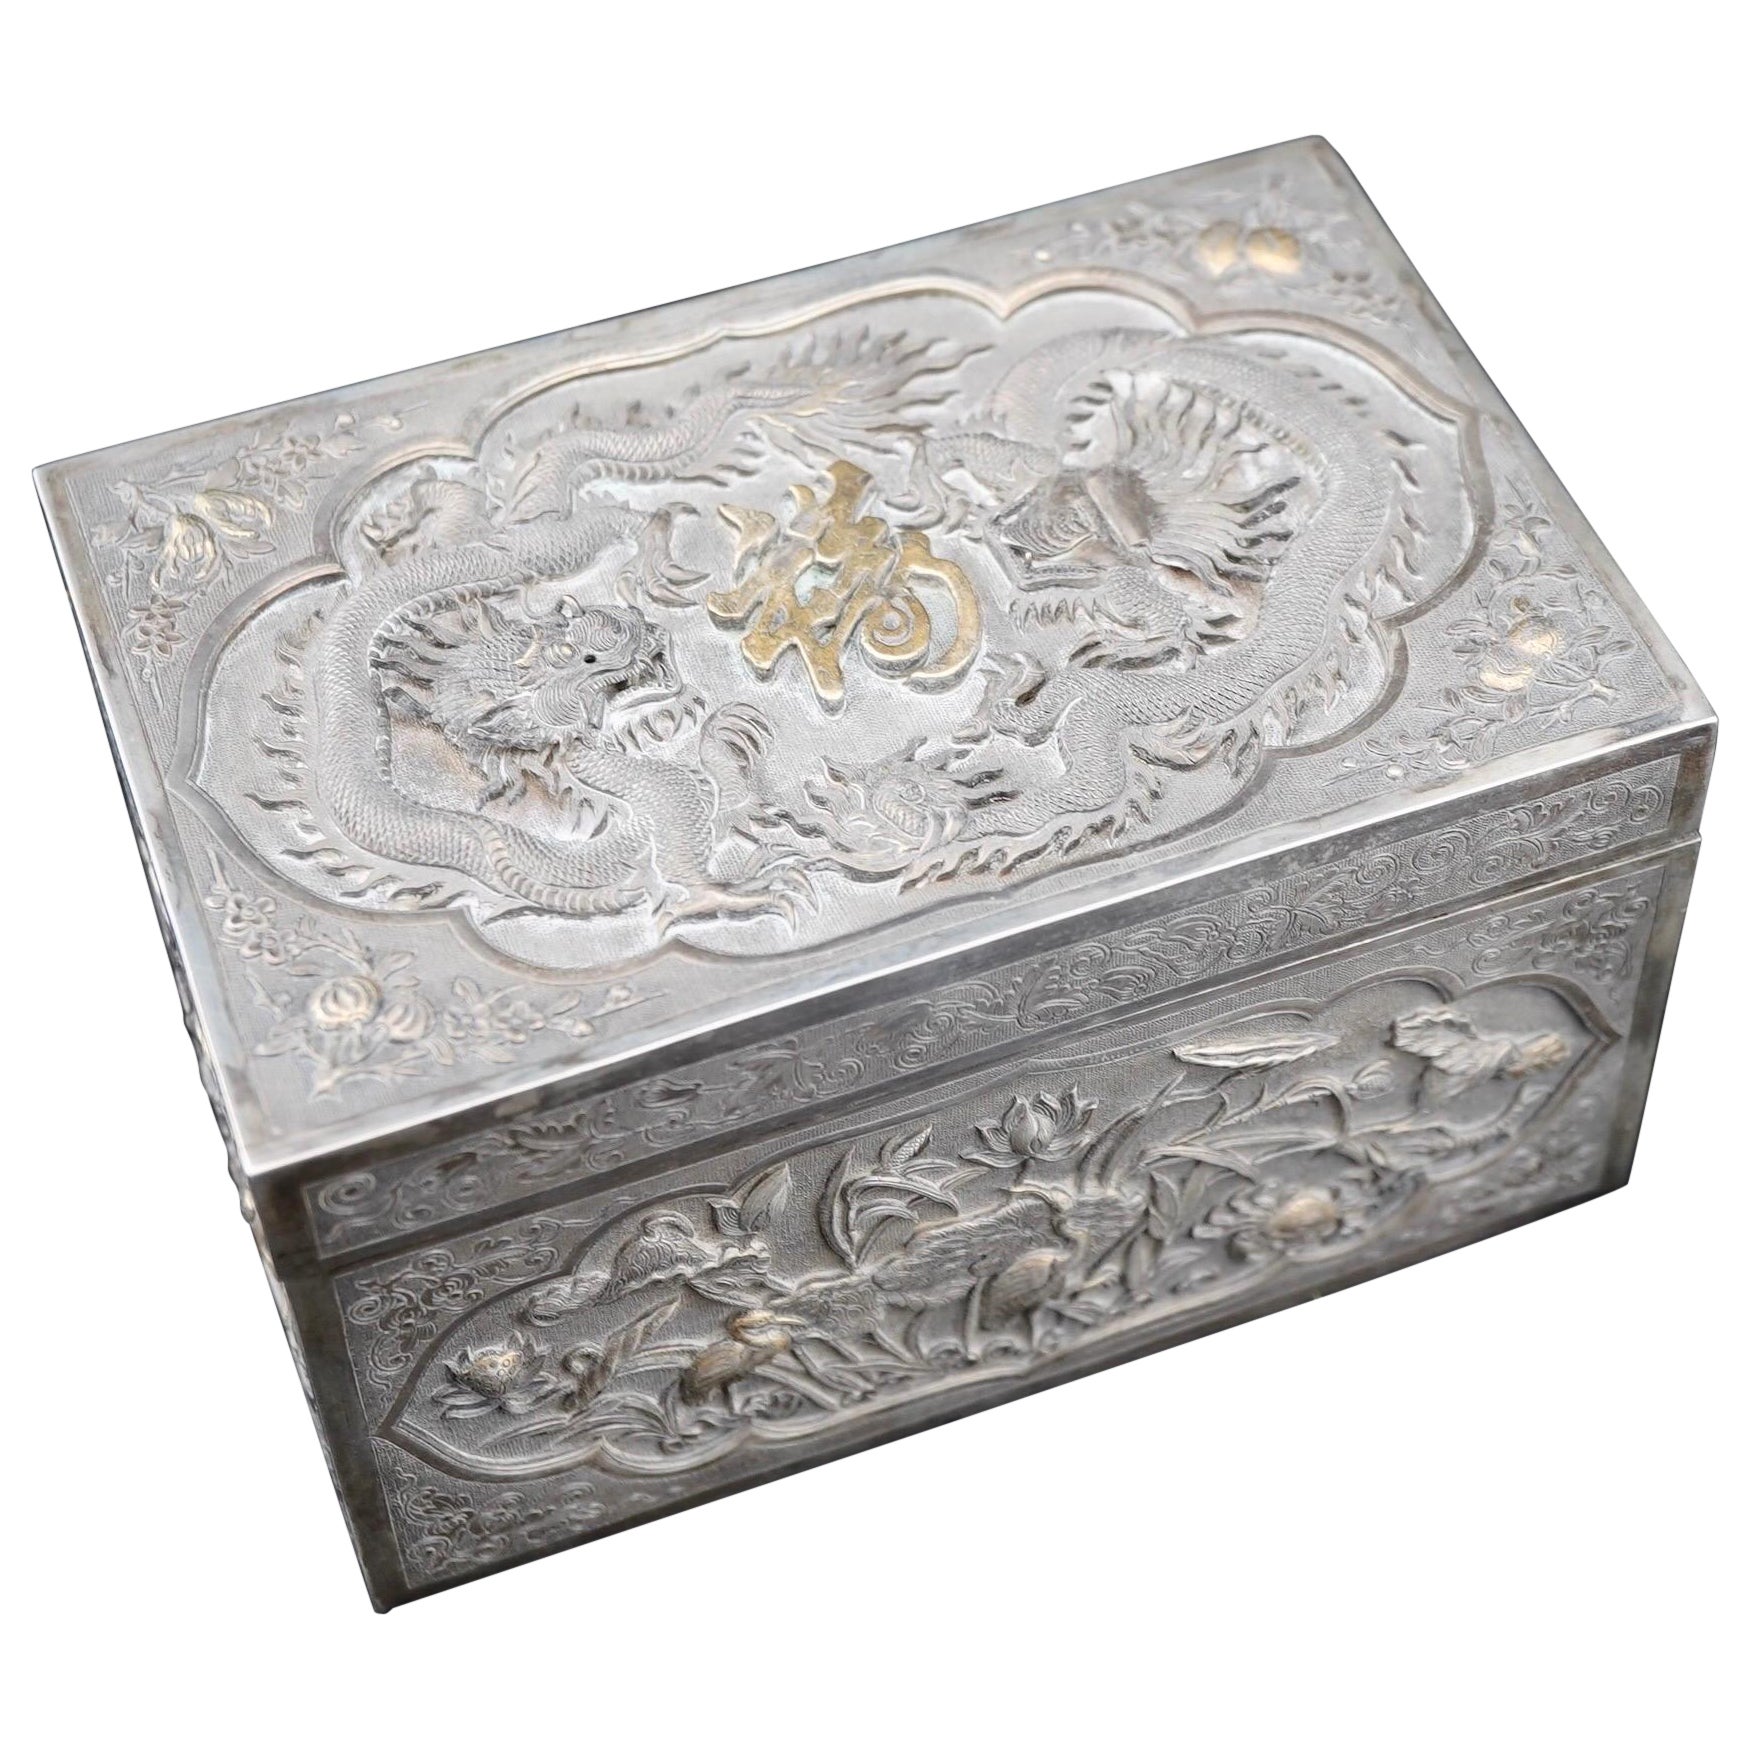 Chinese Export Silver Repousse Dragon and Landscape Box